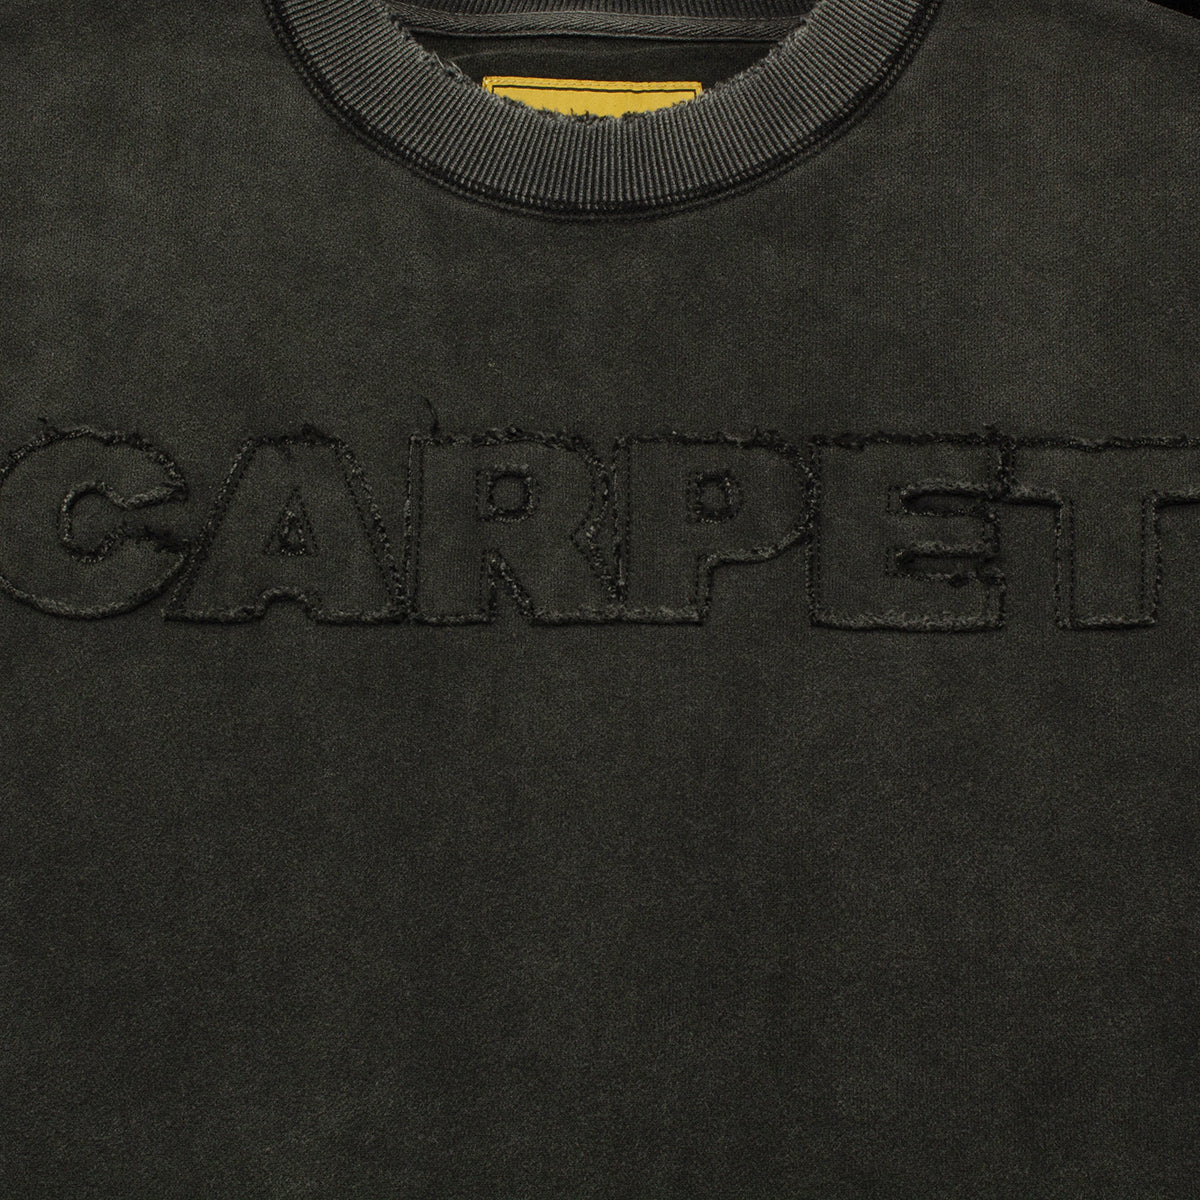 Carpet Company | Freyed Sweater Color : Faded Black